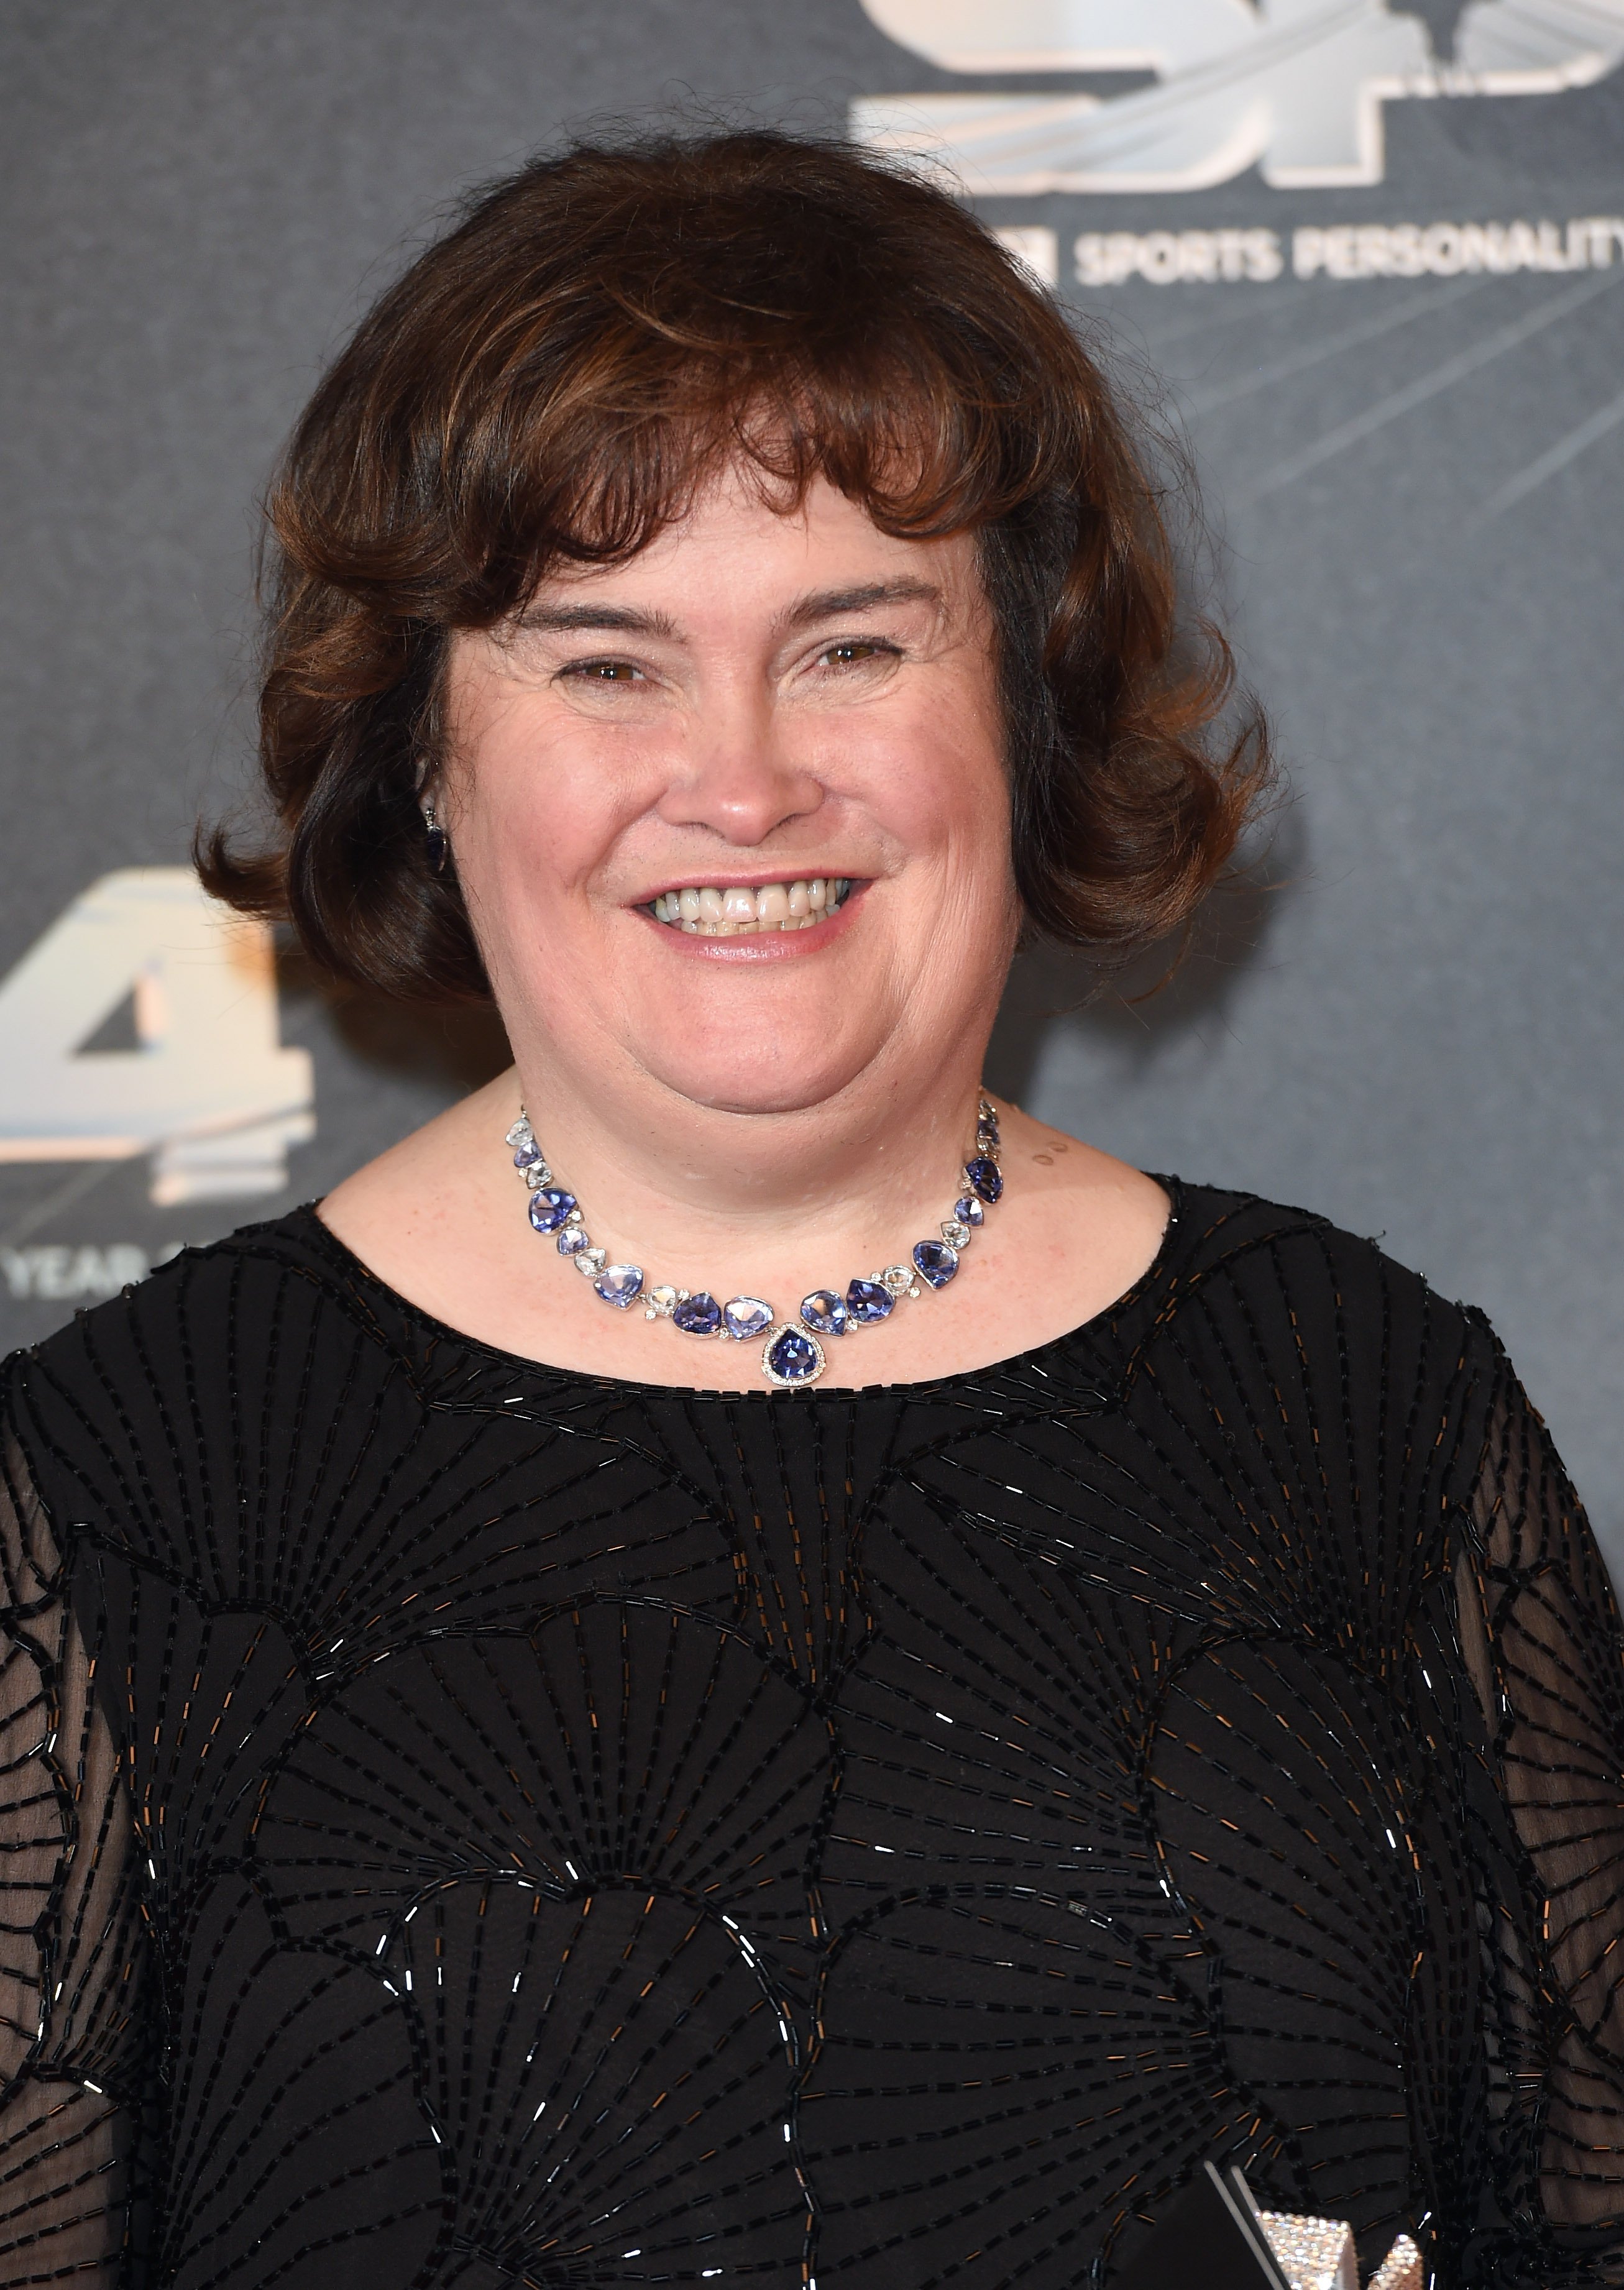 Susan Boyle's Life with Asperger Syndrome